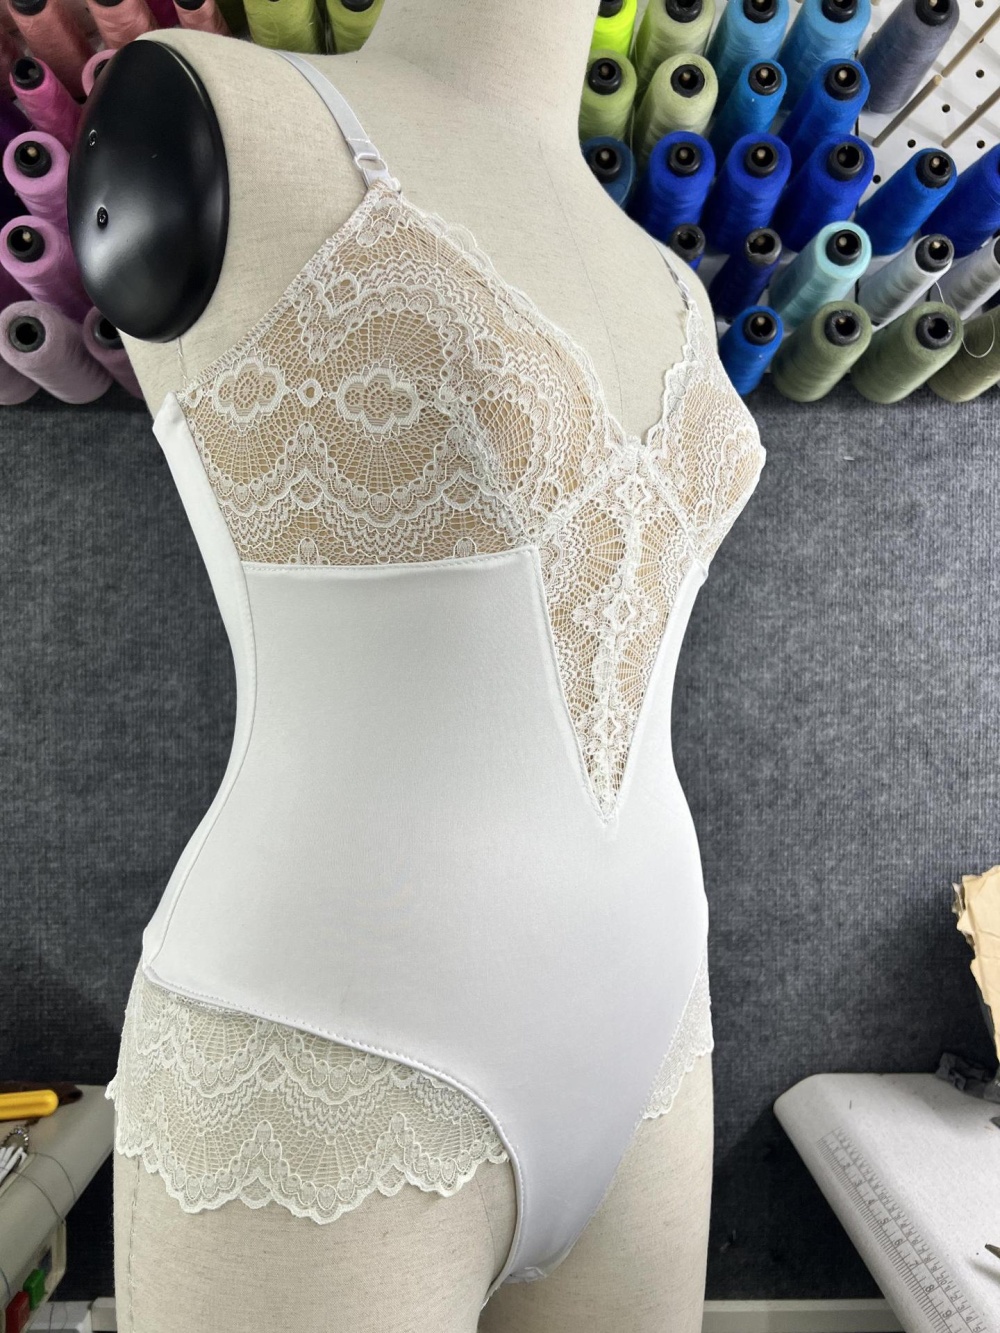 Sexy sling tops lace underwear for women